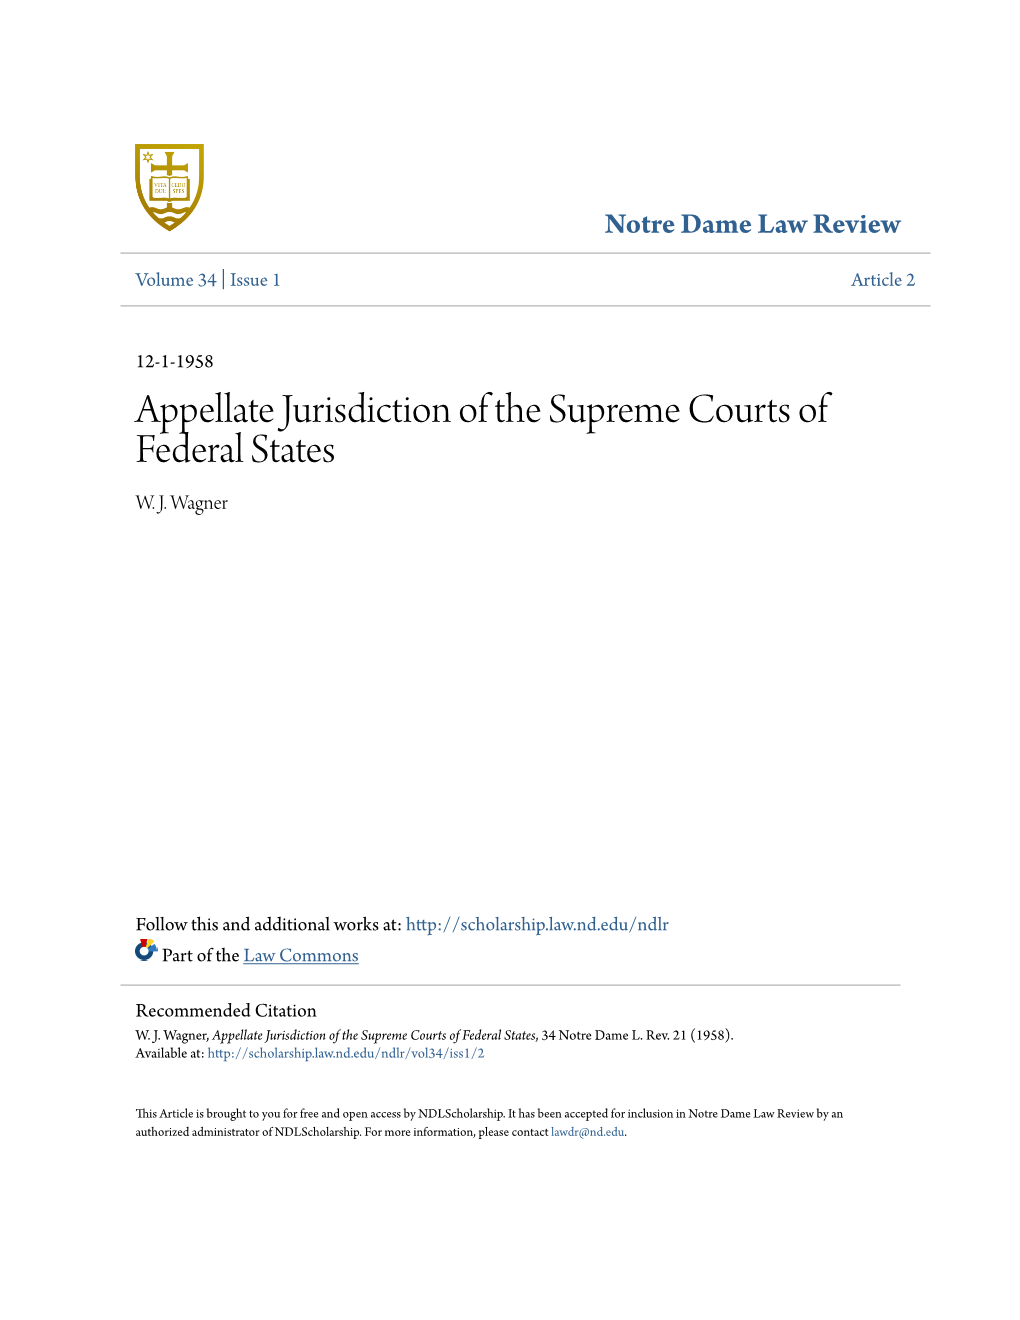 Appellate Jurisdiction of the Supreme Courts of Federal States W